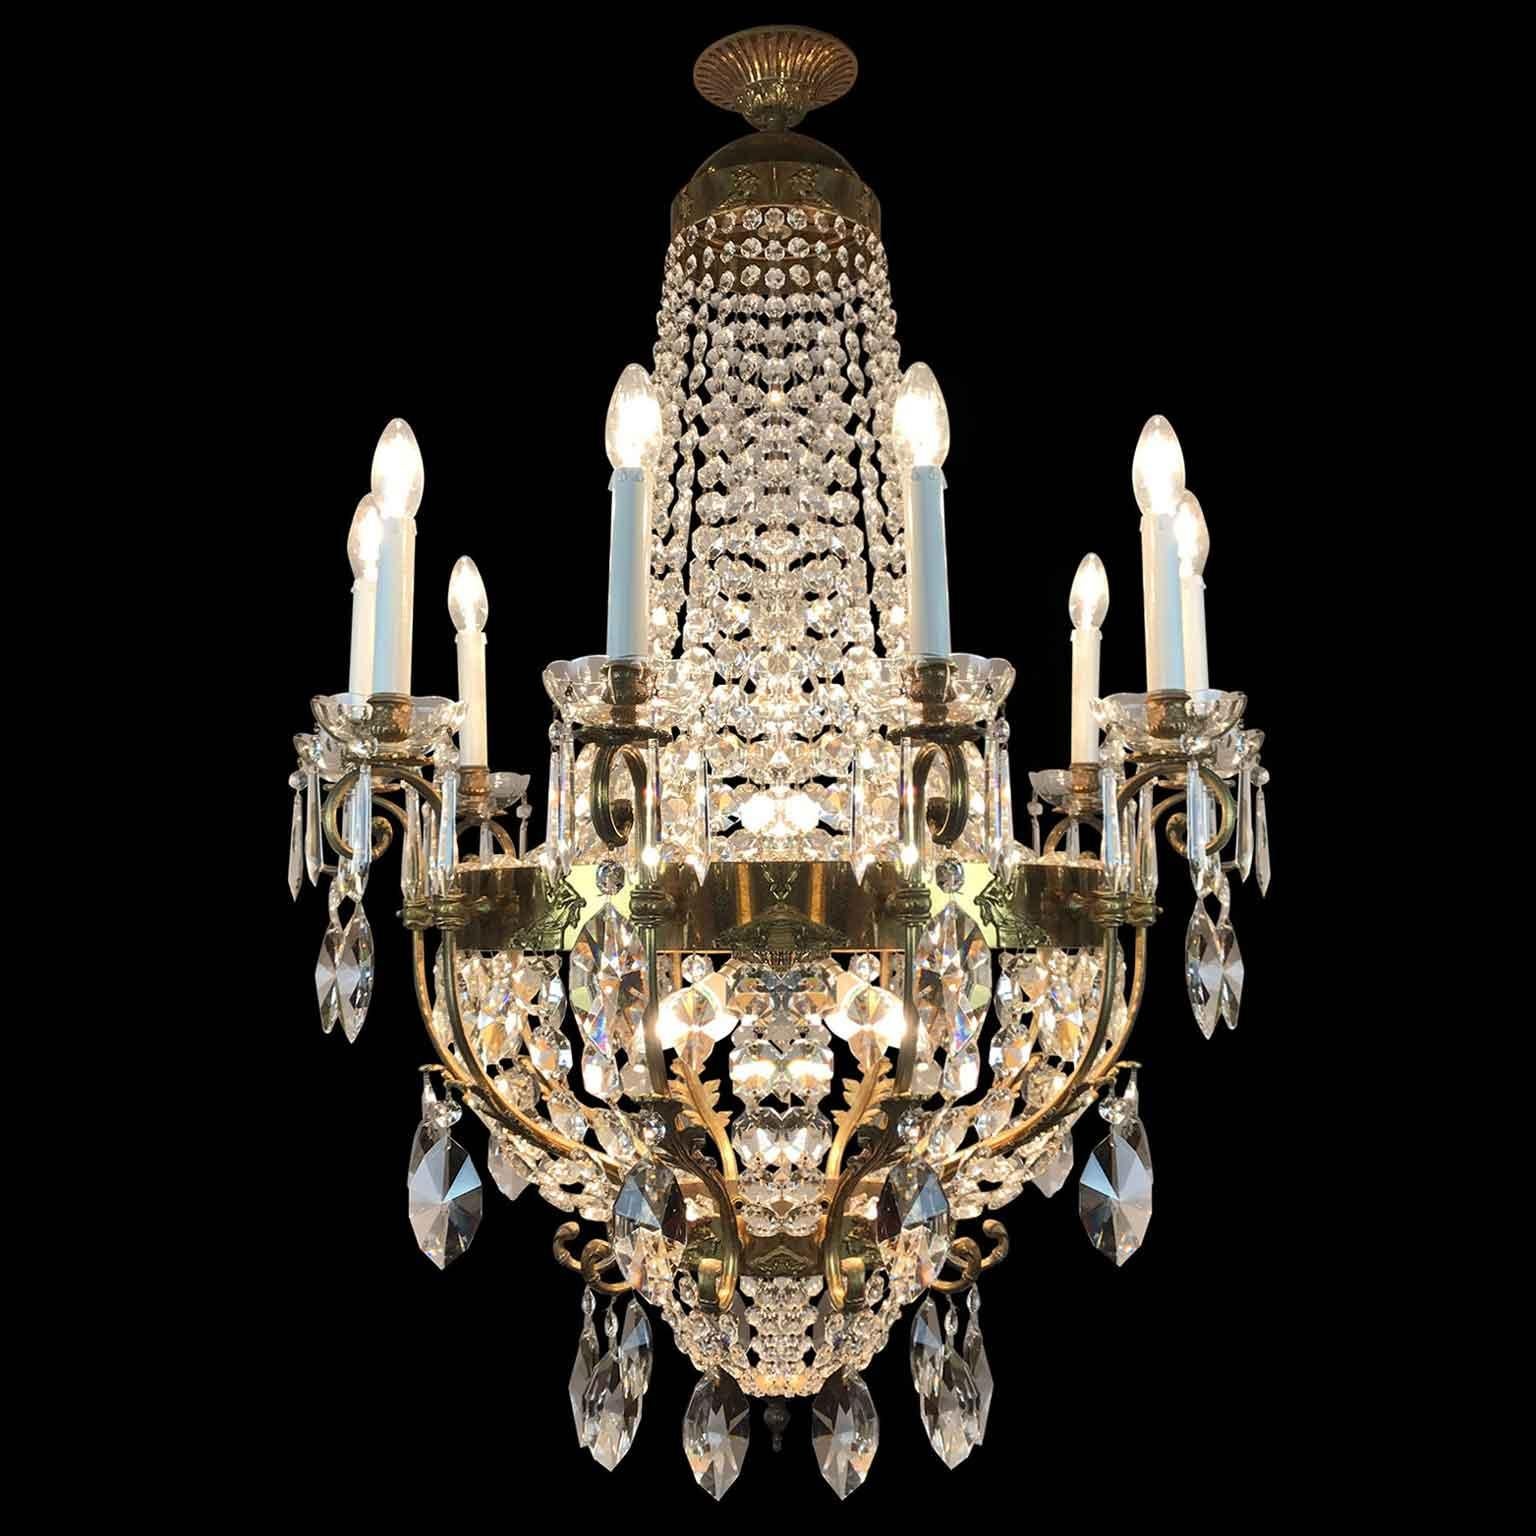 20th Century Italian Neoclassical Style Crystal Chandelier Roman Female Figures For Sale 1